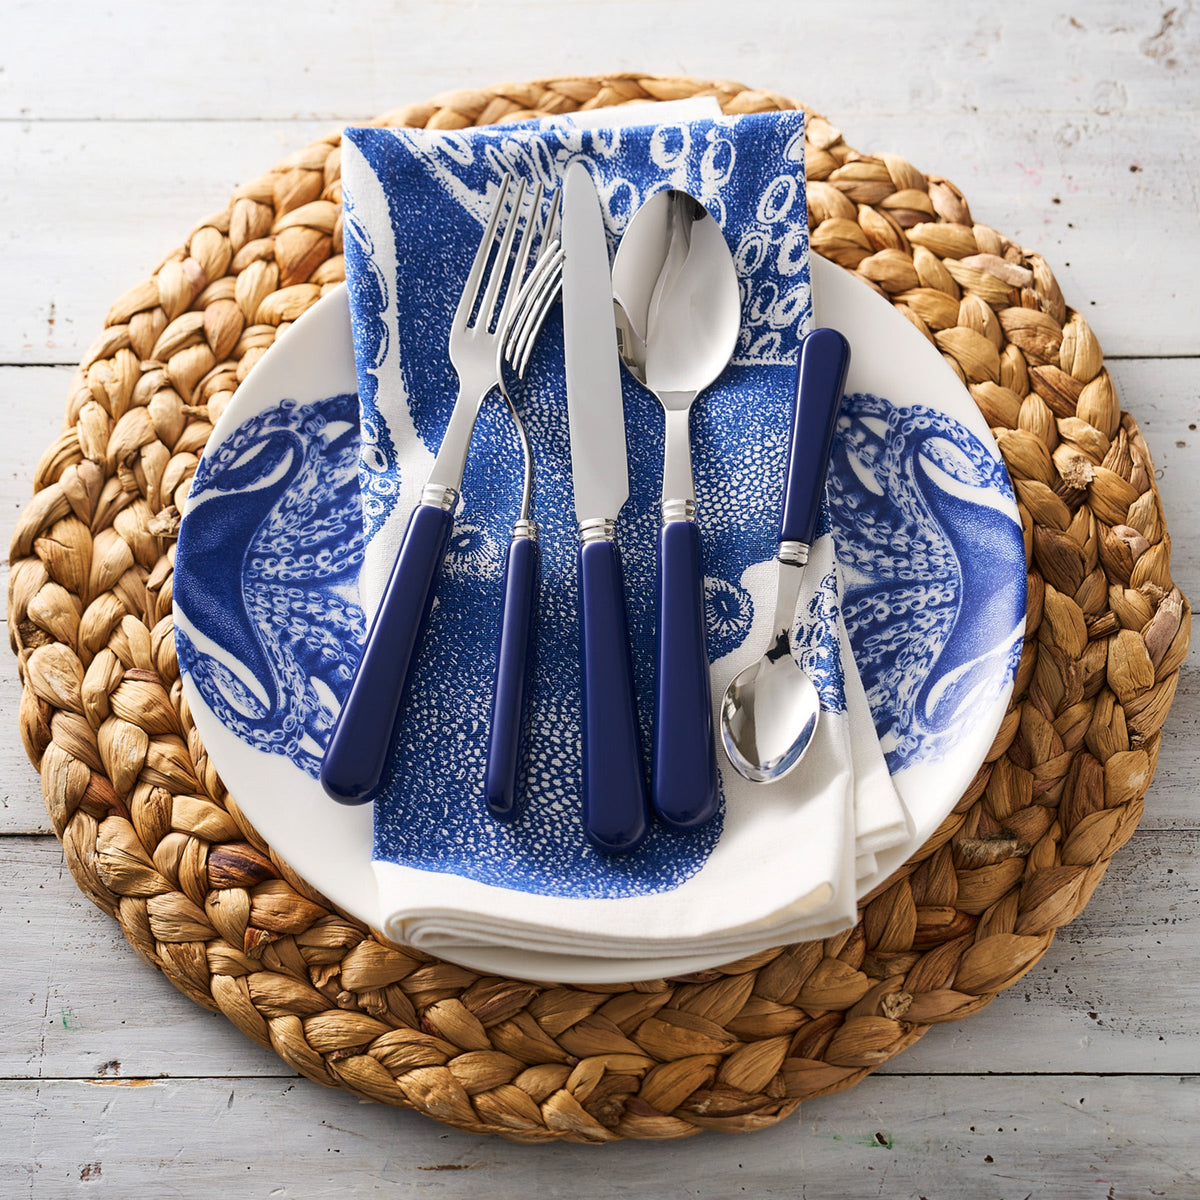 A place setting with a woven placemat, a blue and white plate, Caskata Lucy Dinner Napkins, Set of 4, and blue-handled silverware including a fork, knife, spoon, and teaspoon arranged on top.